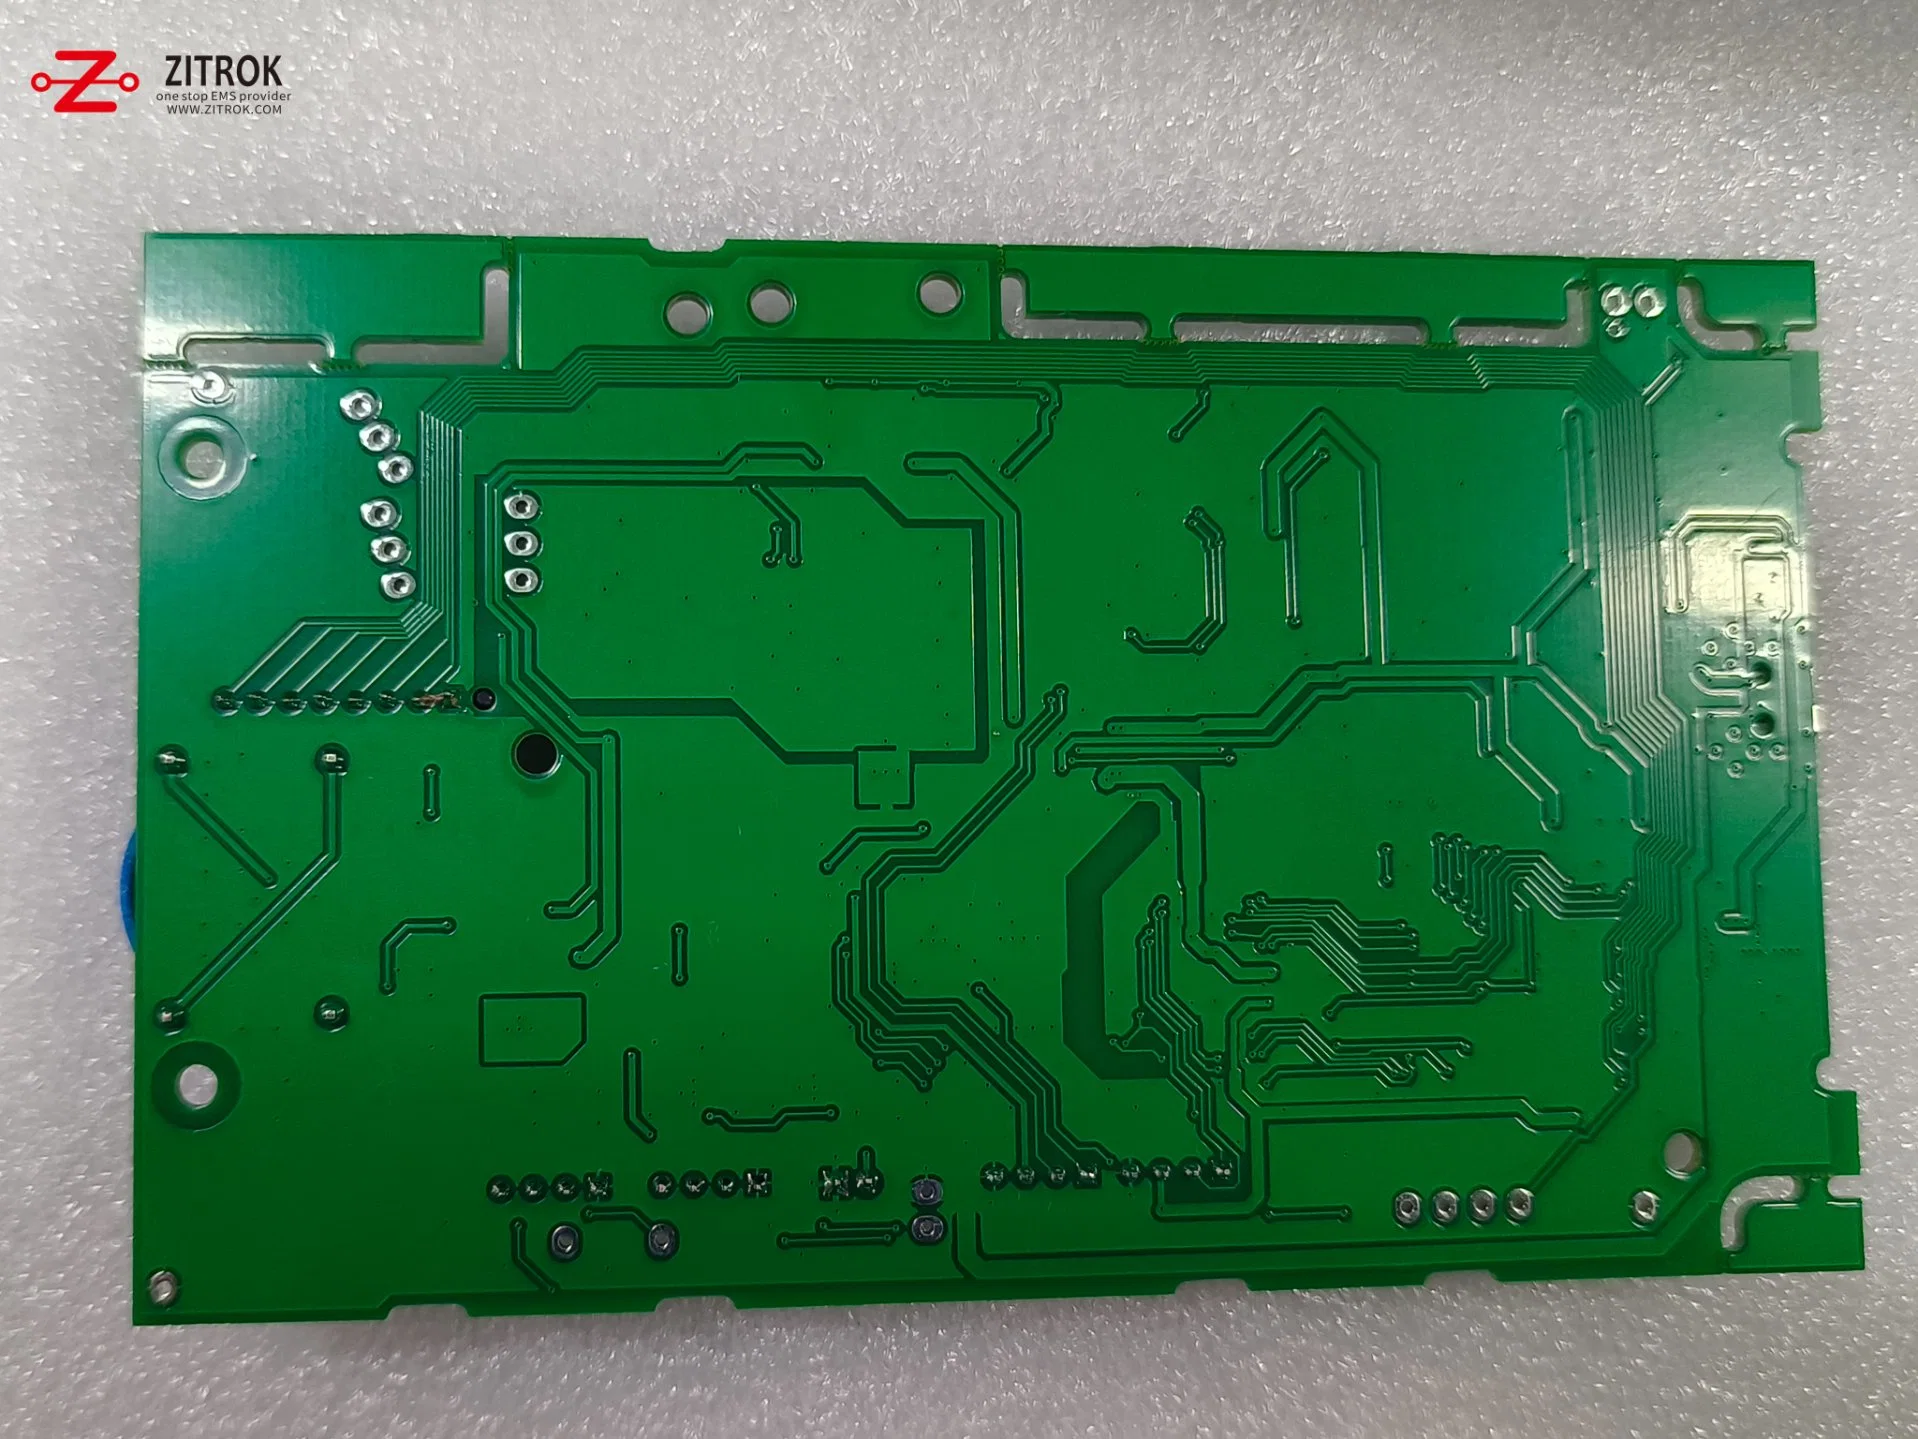 Printed Circuit Board, EMS PCB Assembly, Electronics Mobile Phone Motherboard PCB Manufacturing